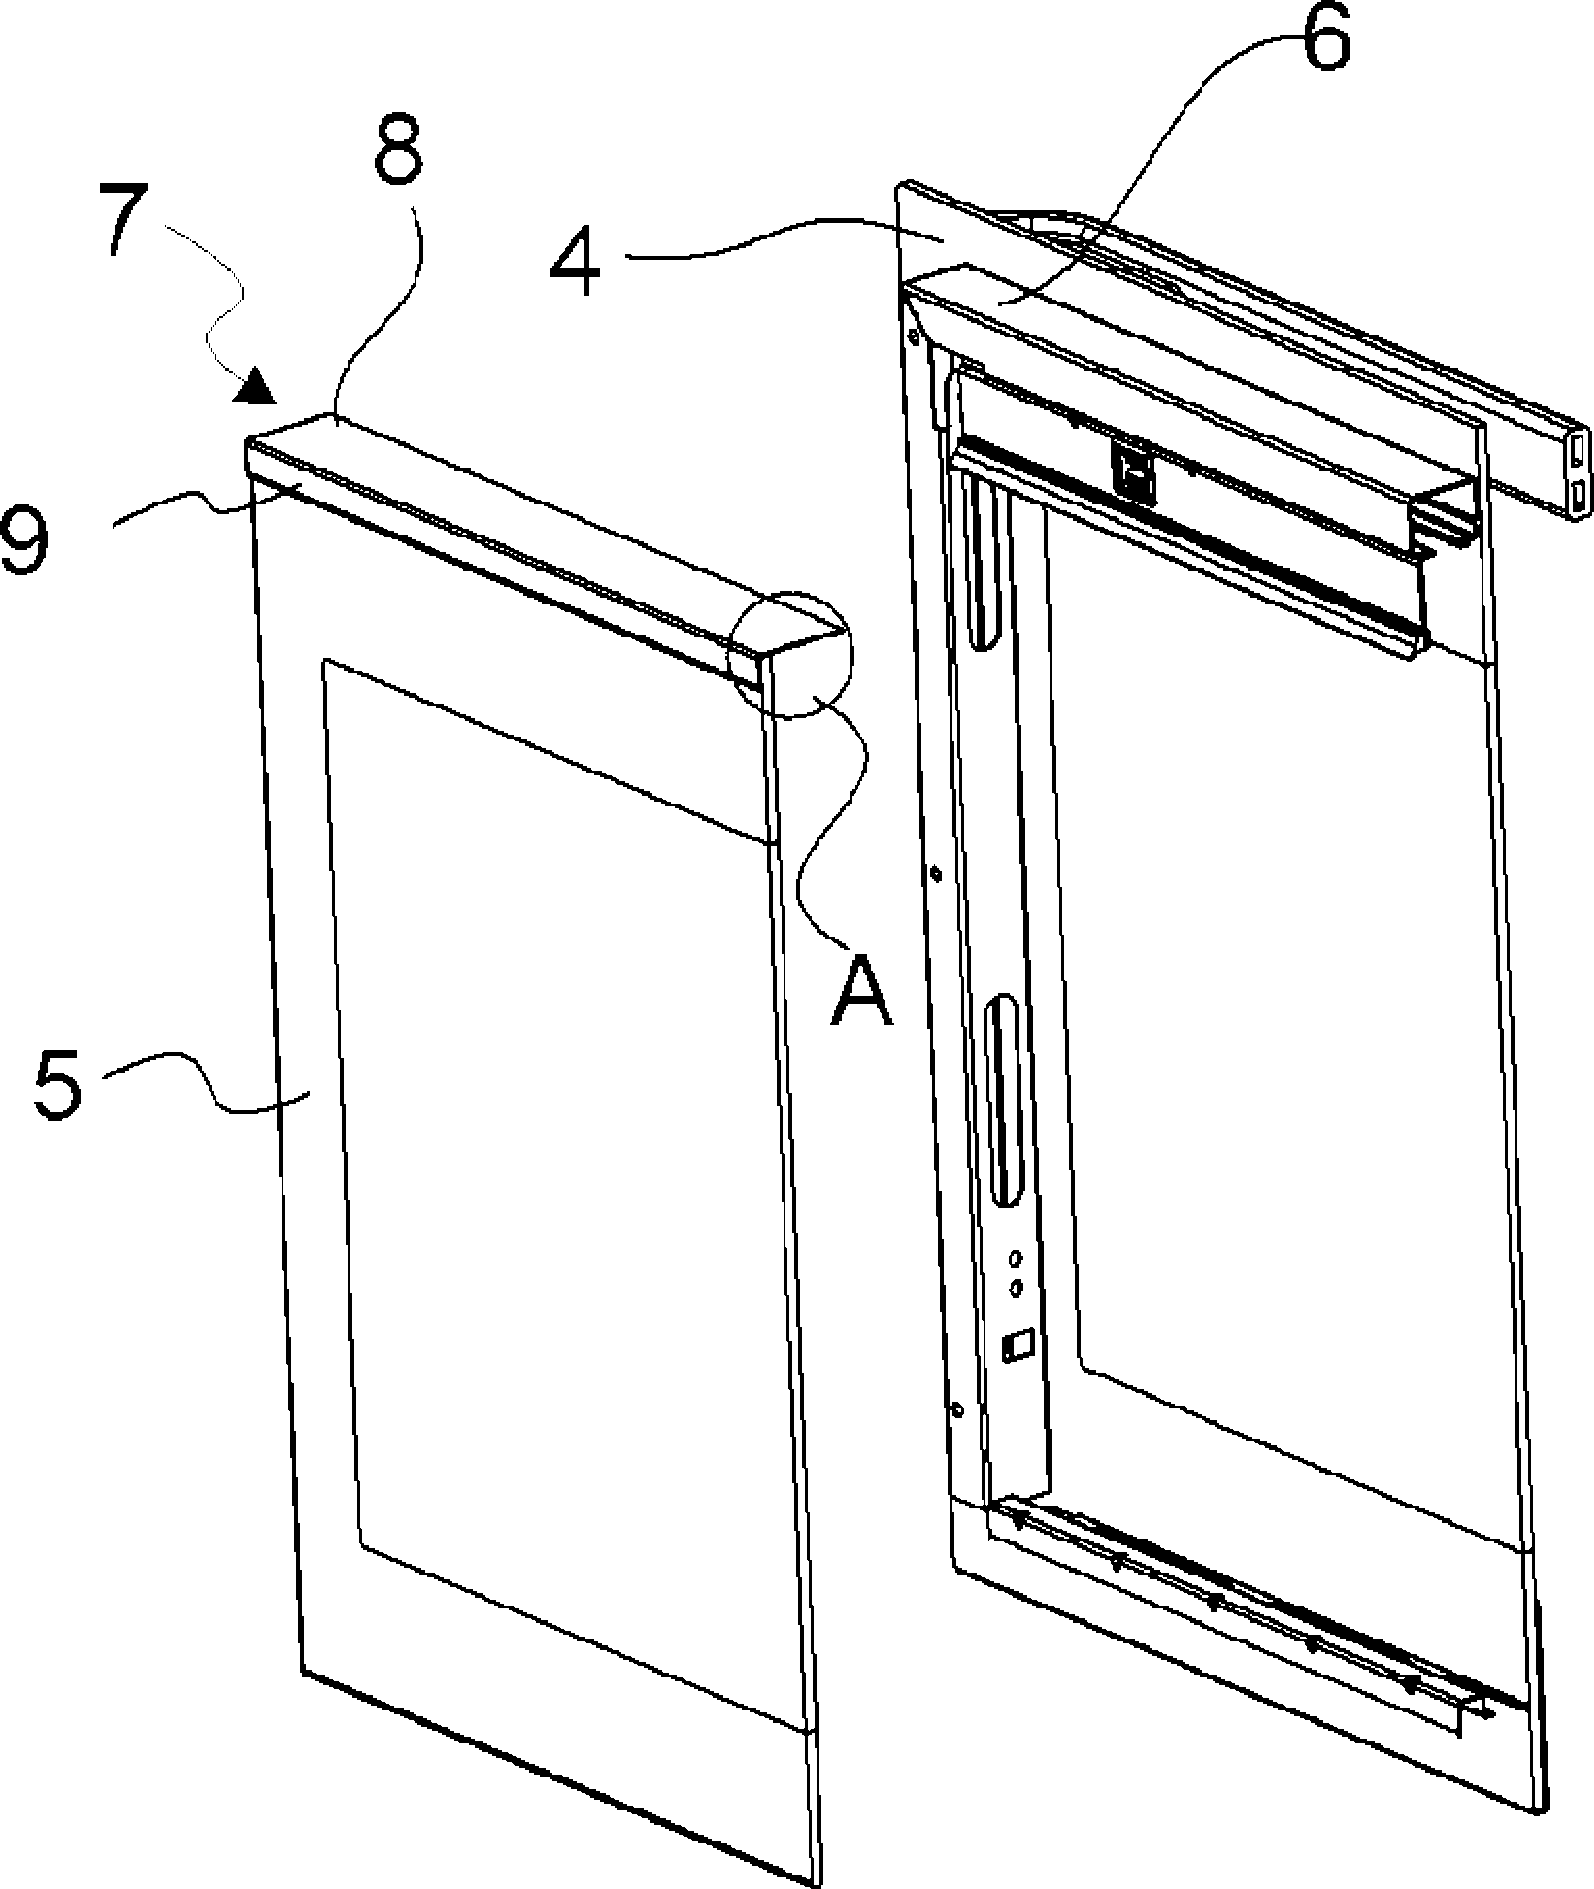 A cooking device comprising a covering member